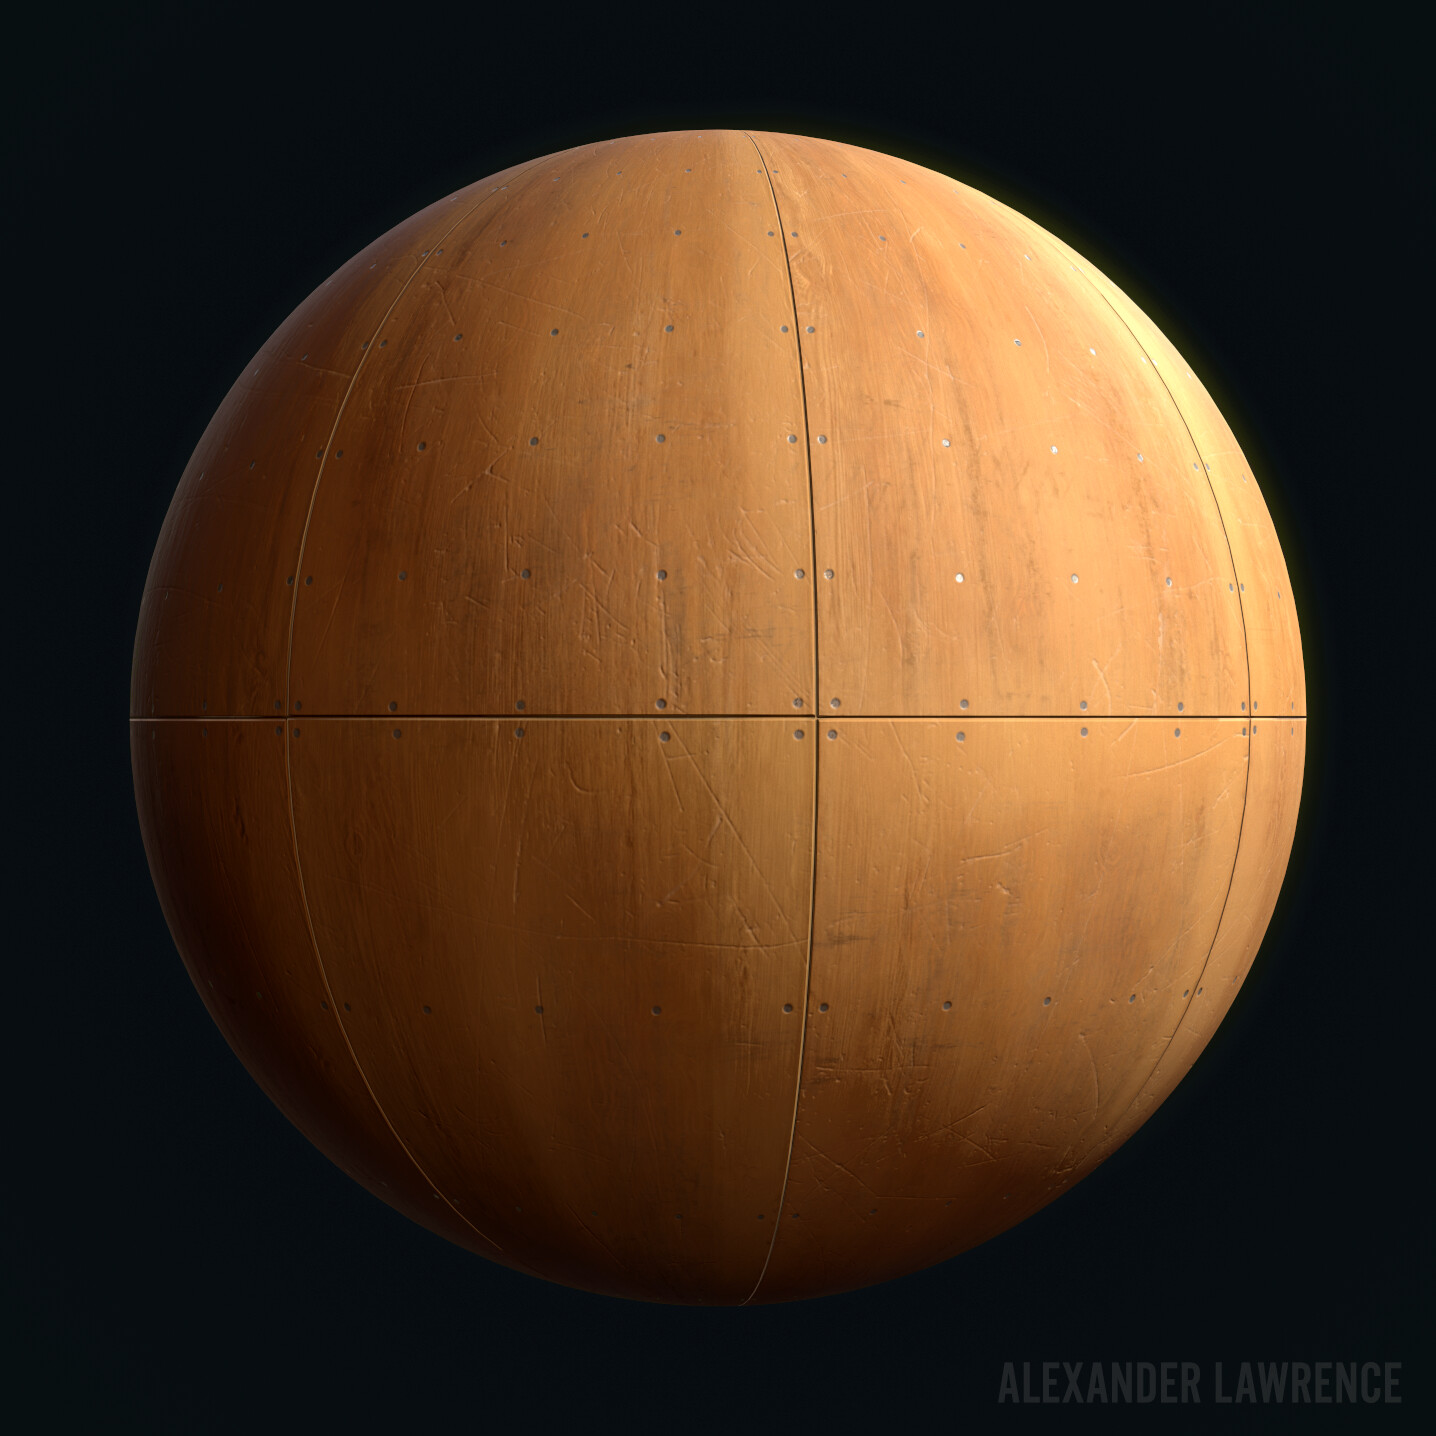 This is one of two bare wood floor materials used on the ramp. Procedurally generated in Substance Designer.